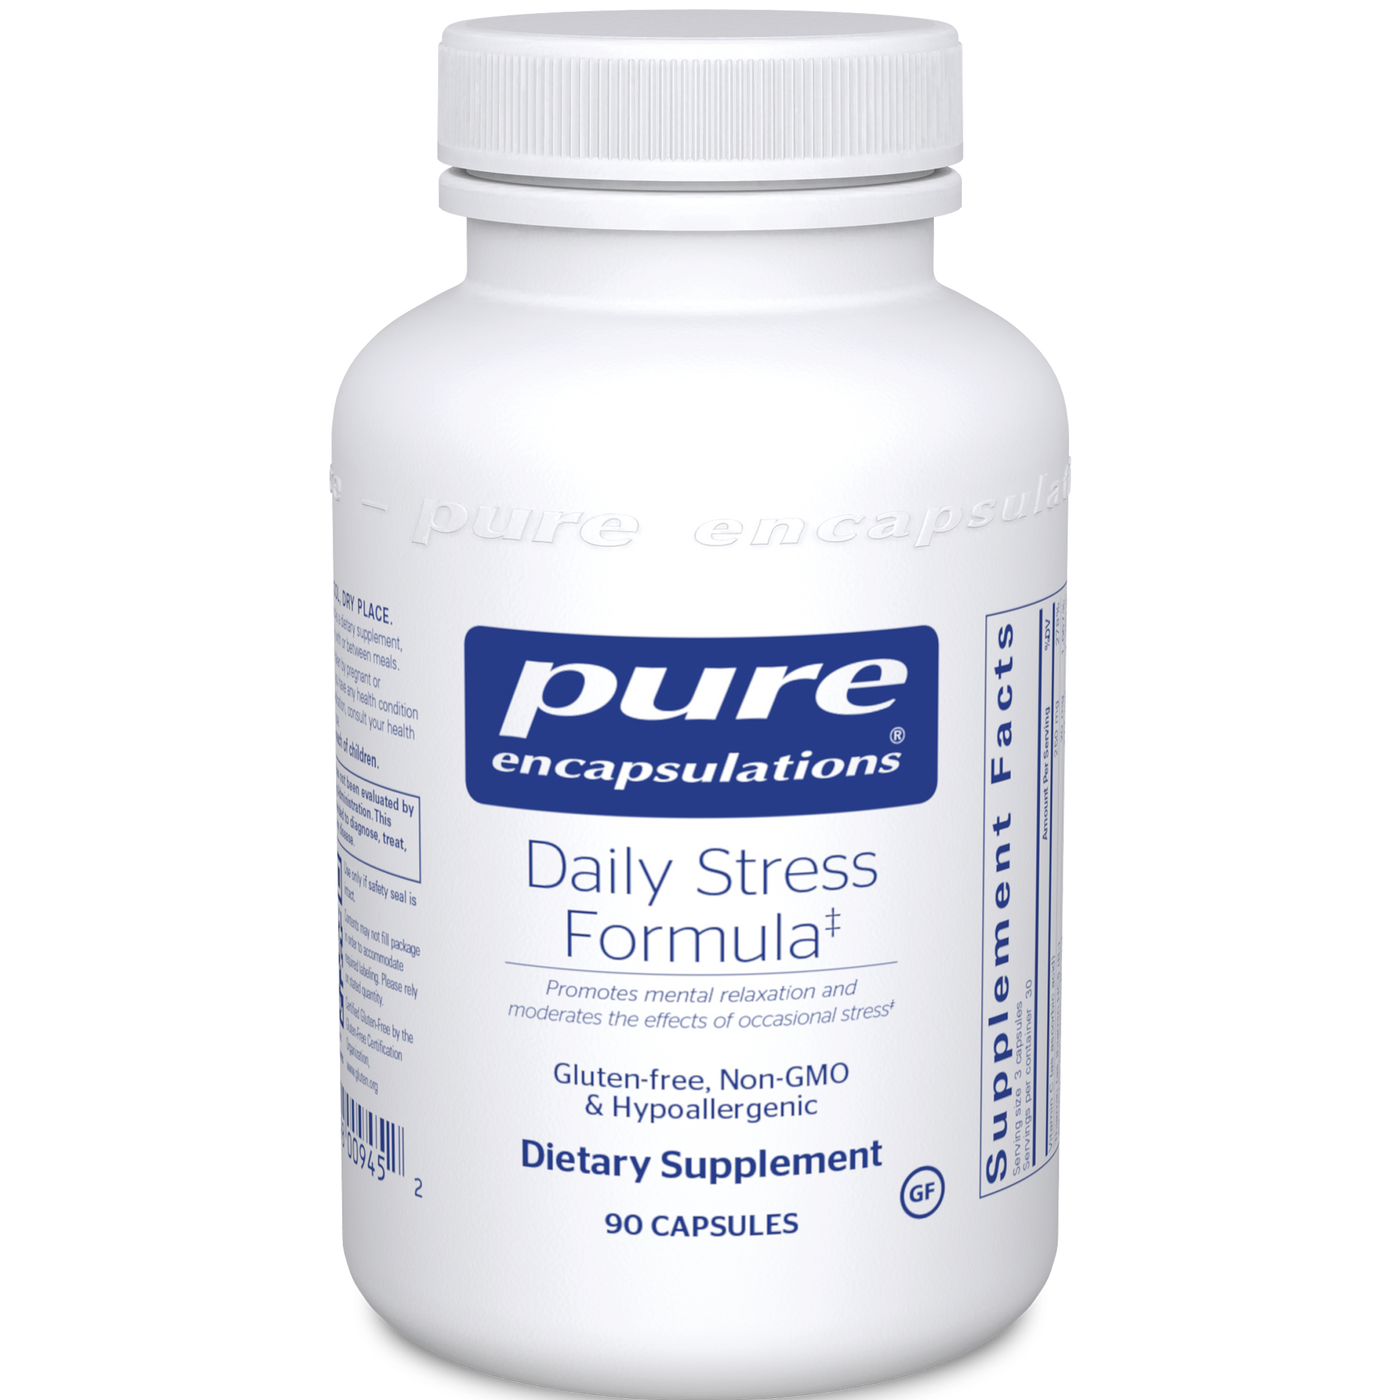 Daily Stress Formula 90 caps Curated Wellness